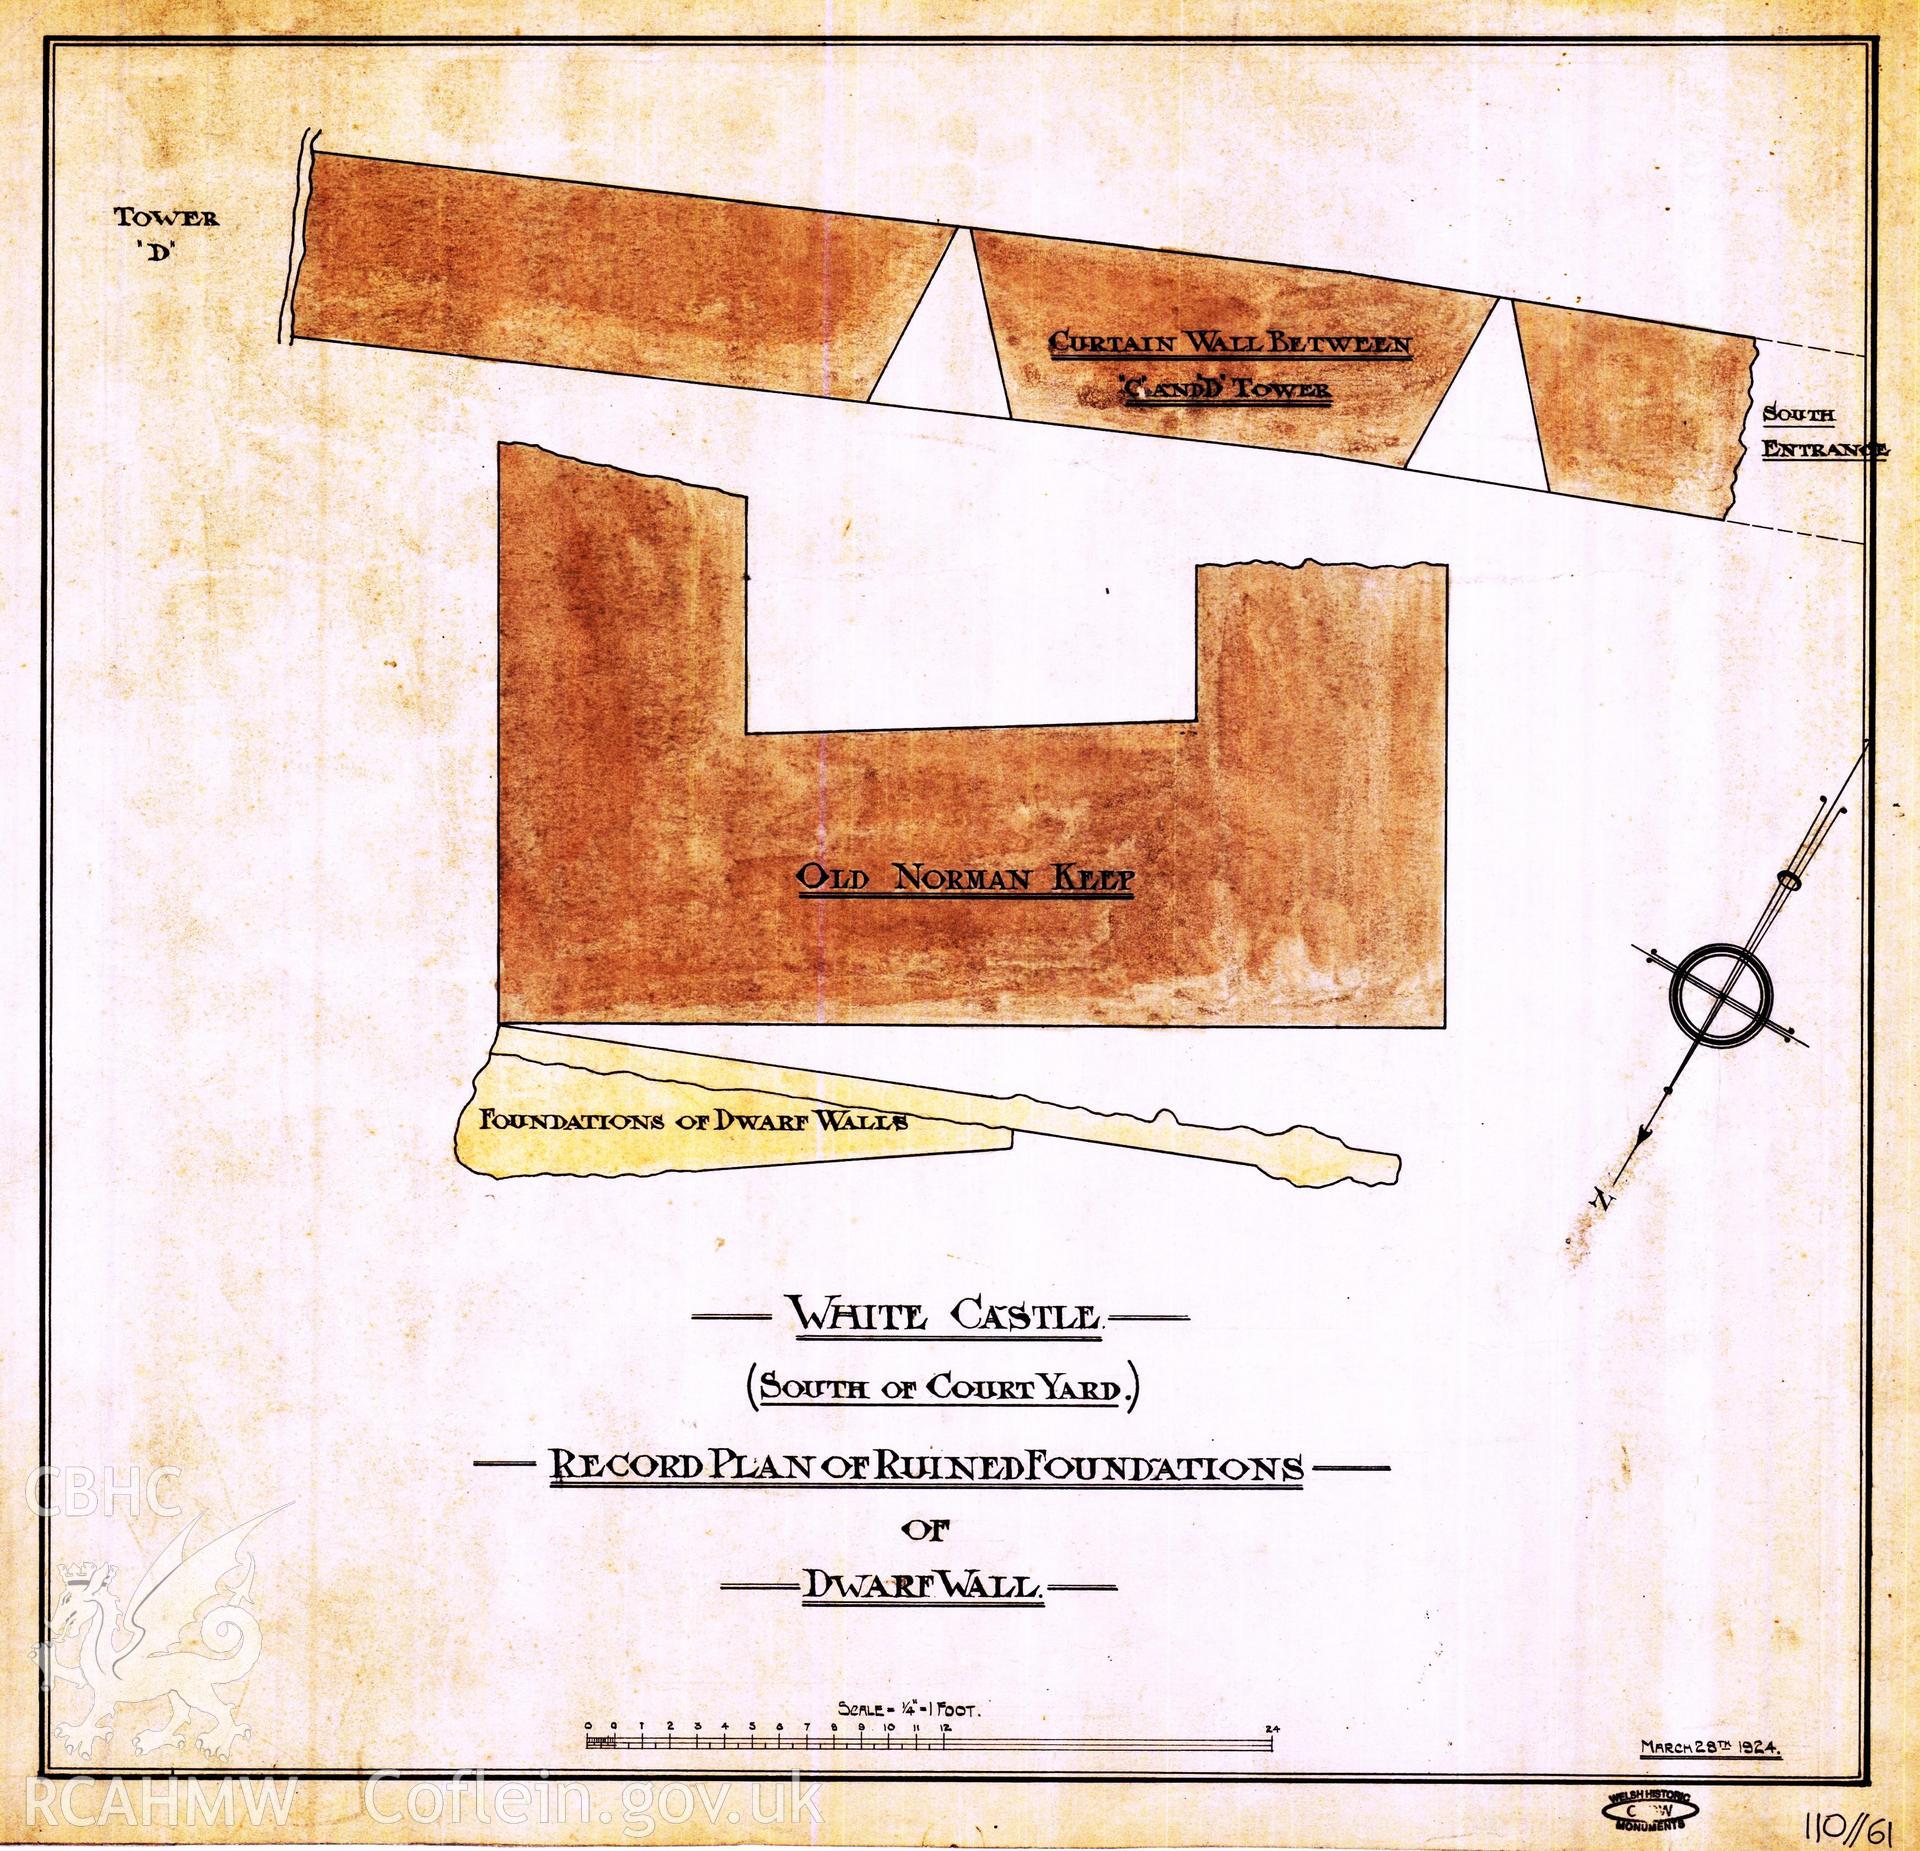 Cadw guardianship monument drawing of White Castle. Keep etc, plan. Cadw Ref. No:110//61. Scale 1:48.